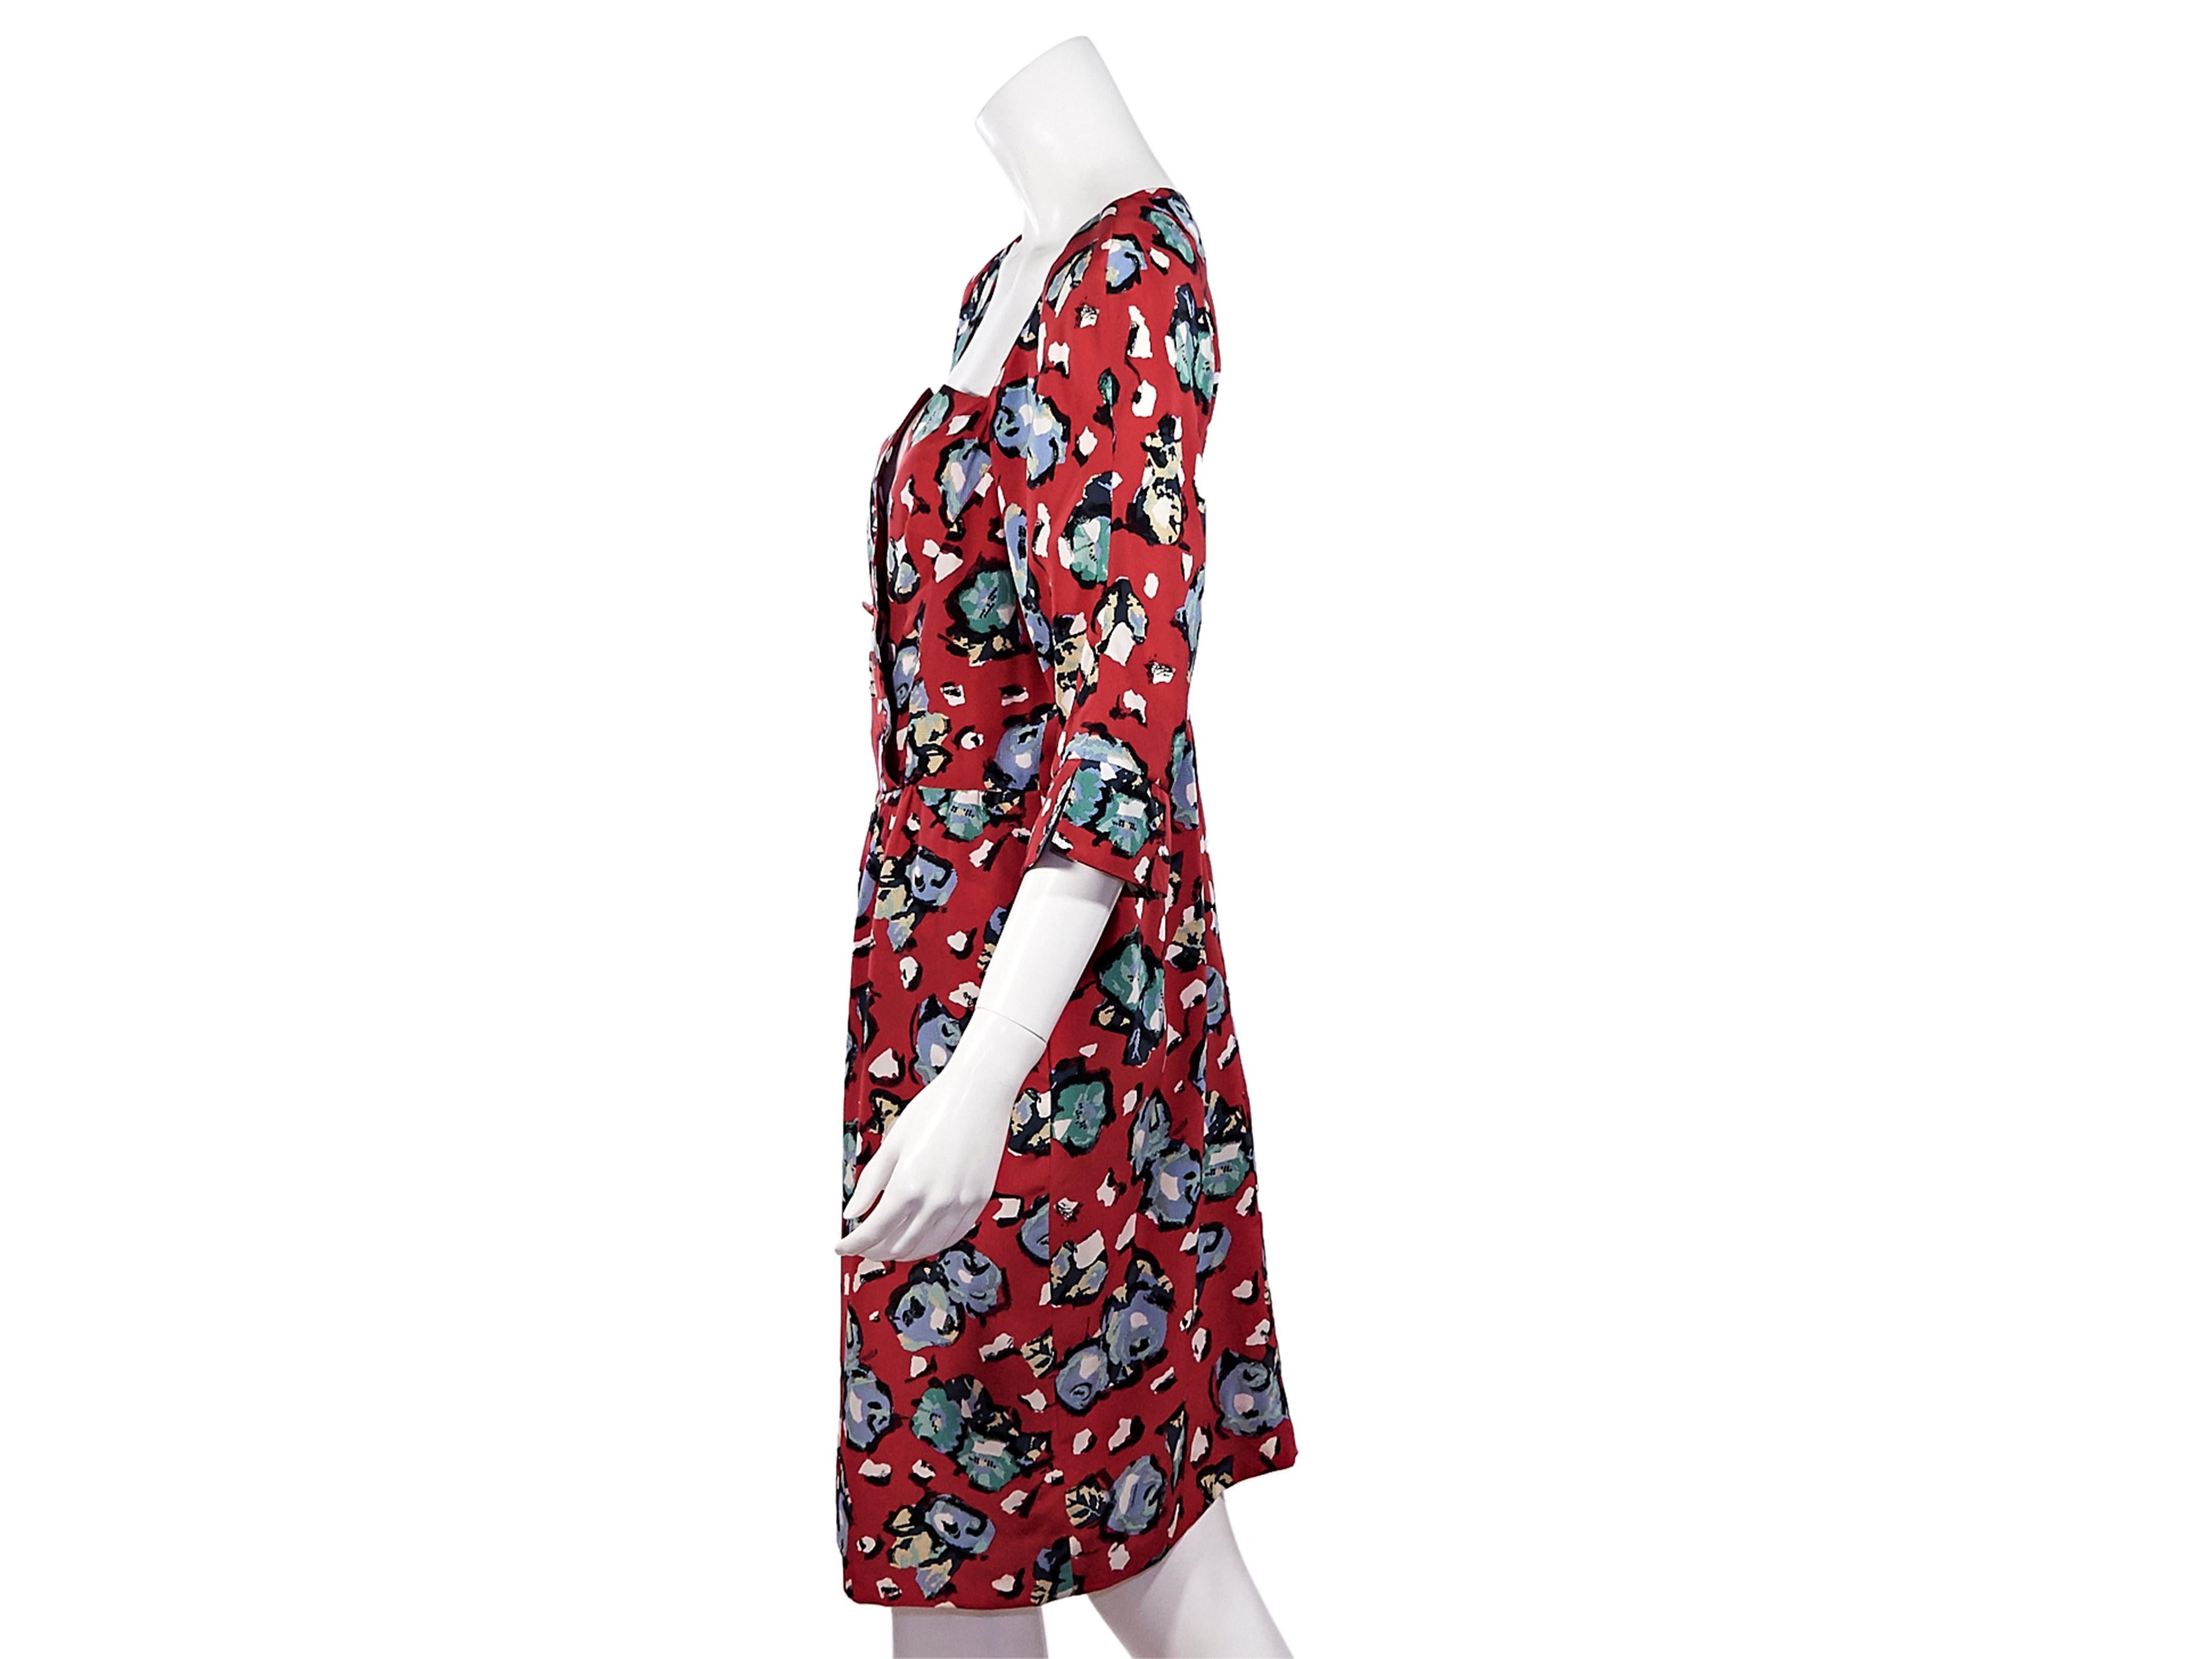 Product details:  Vintage multicolor floral-printed silk dress by Karl Lagerfeld.  Elbow-length sleeves.  Button-front bodice.  Concealed back zip closure.  36